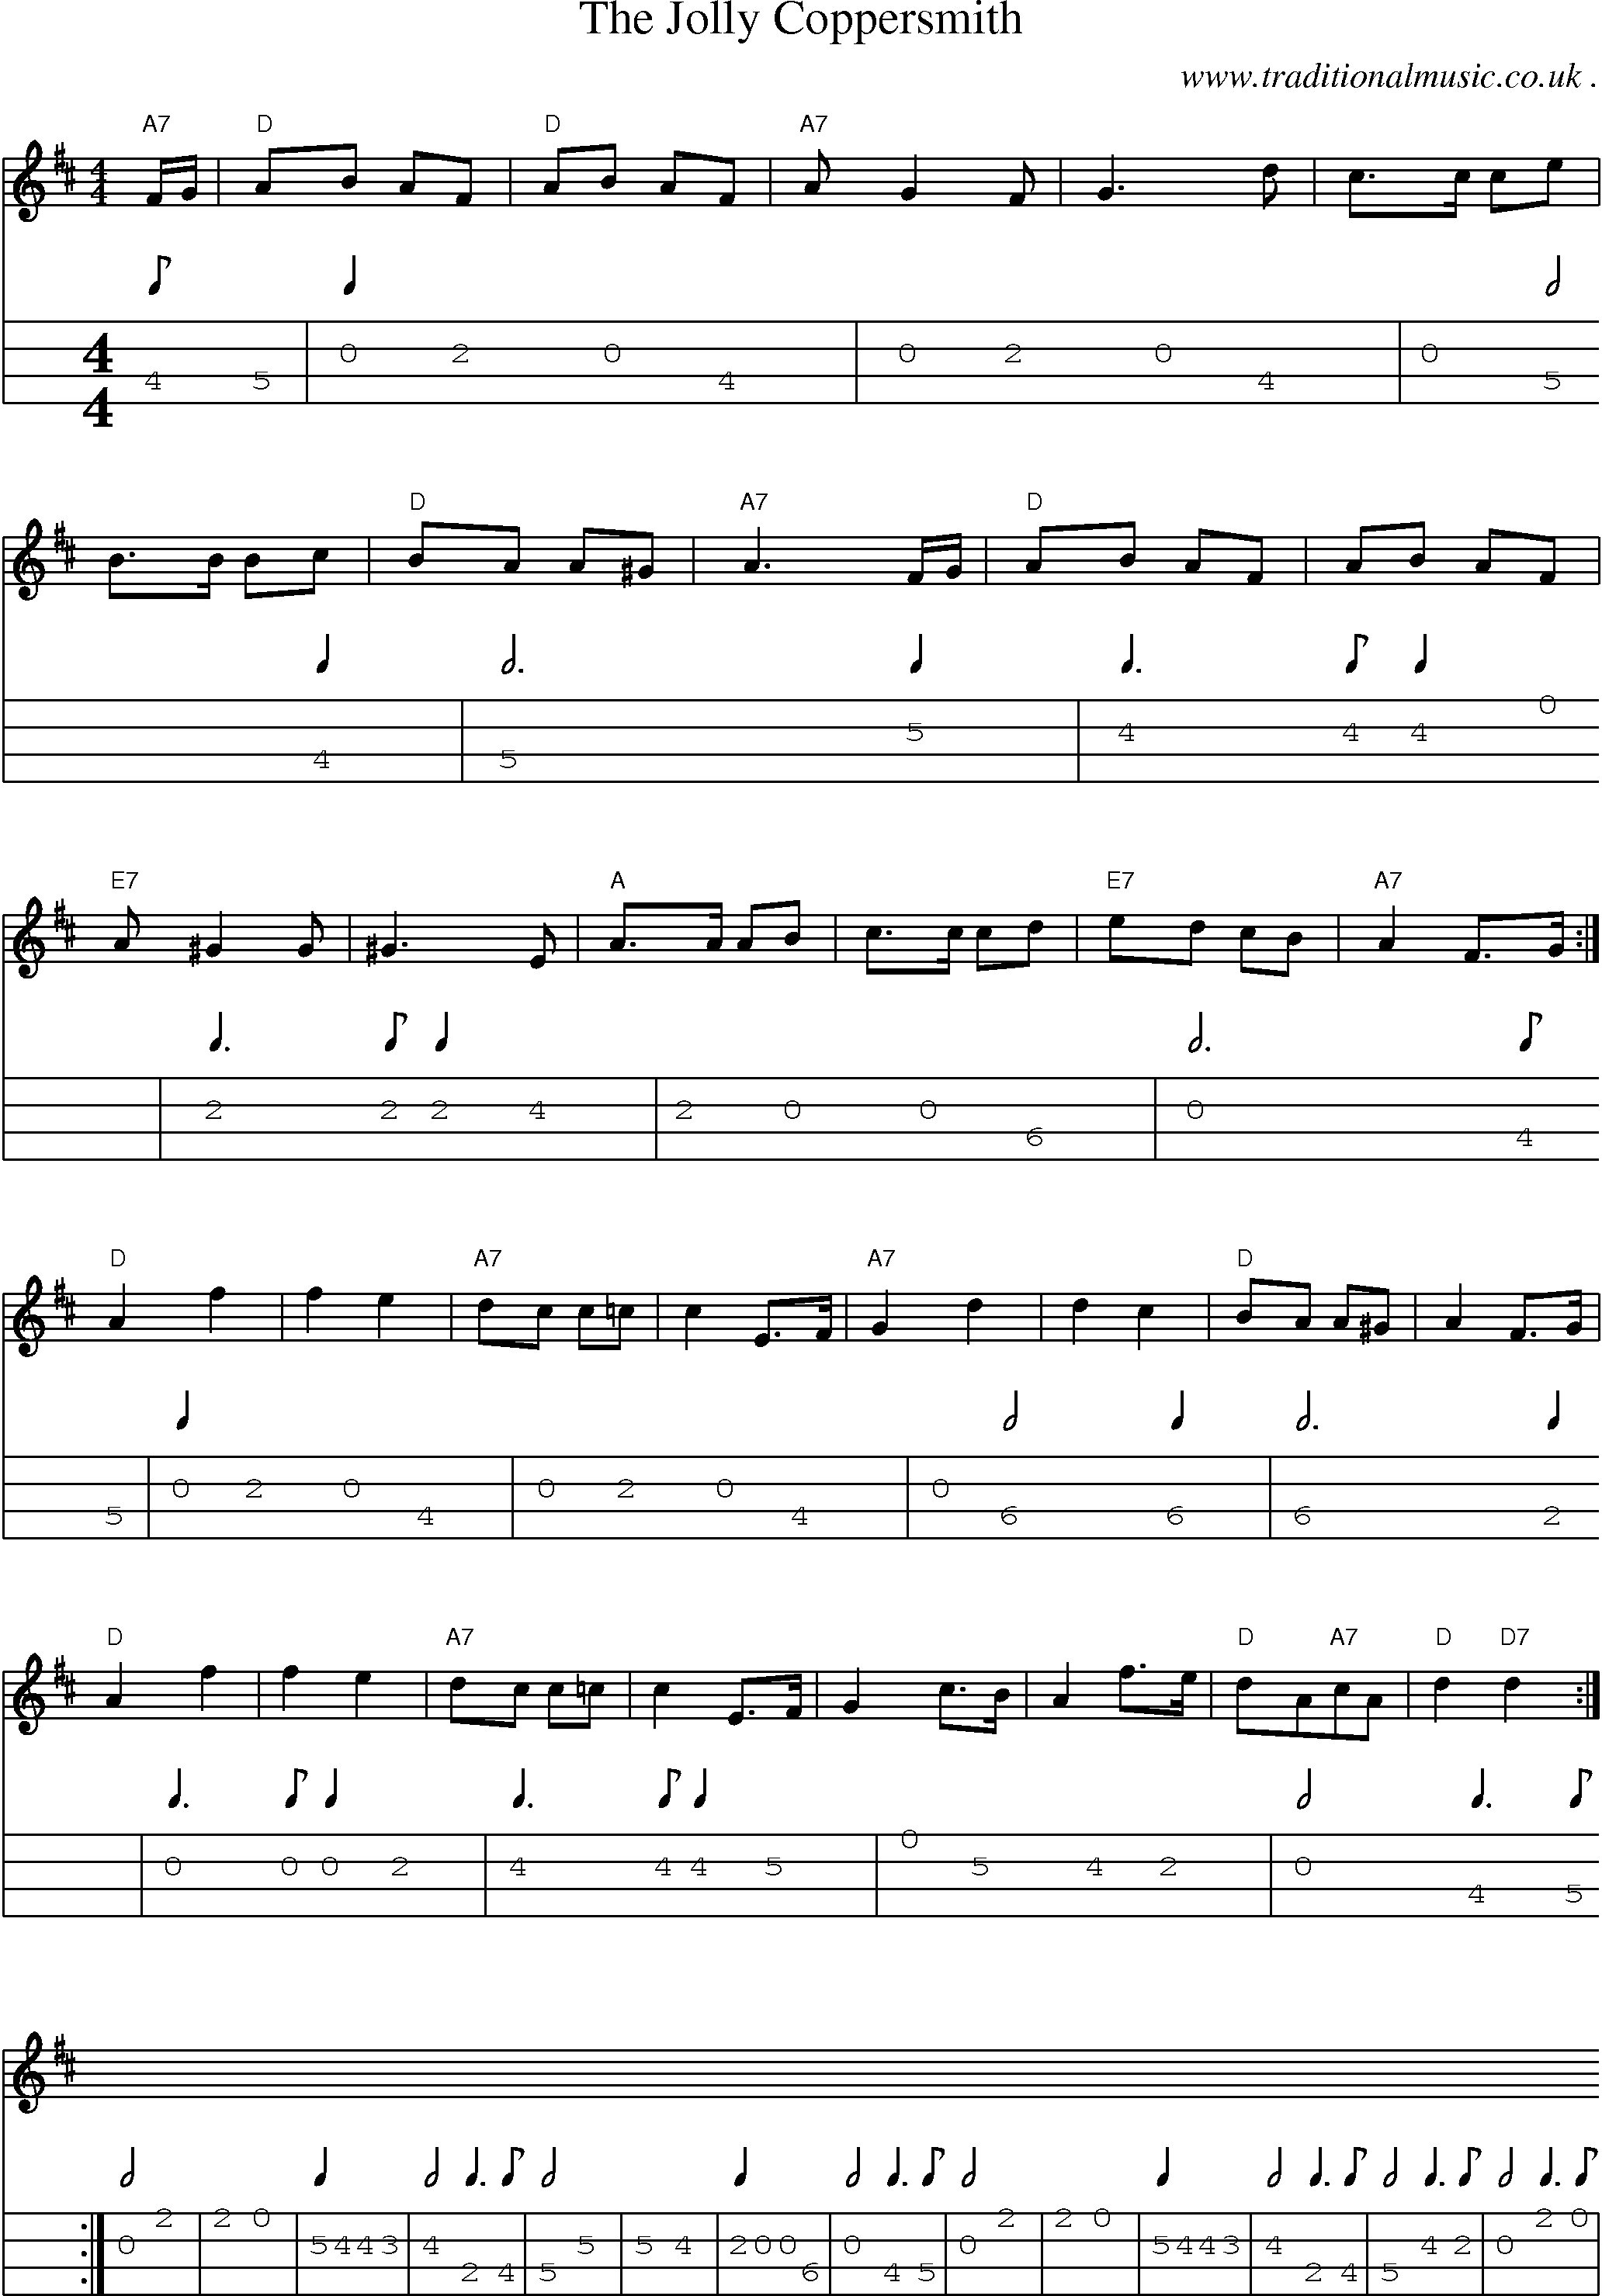 Sheet-Music and Mandolin Tabs for The Jolly Coppersmith